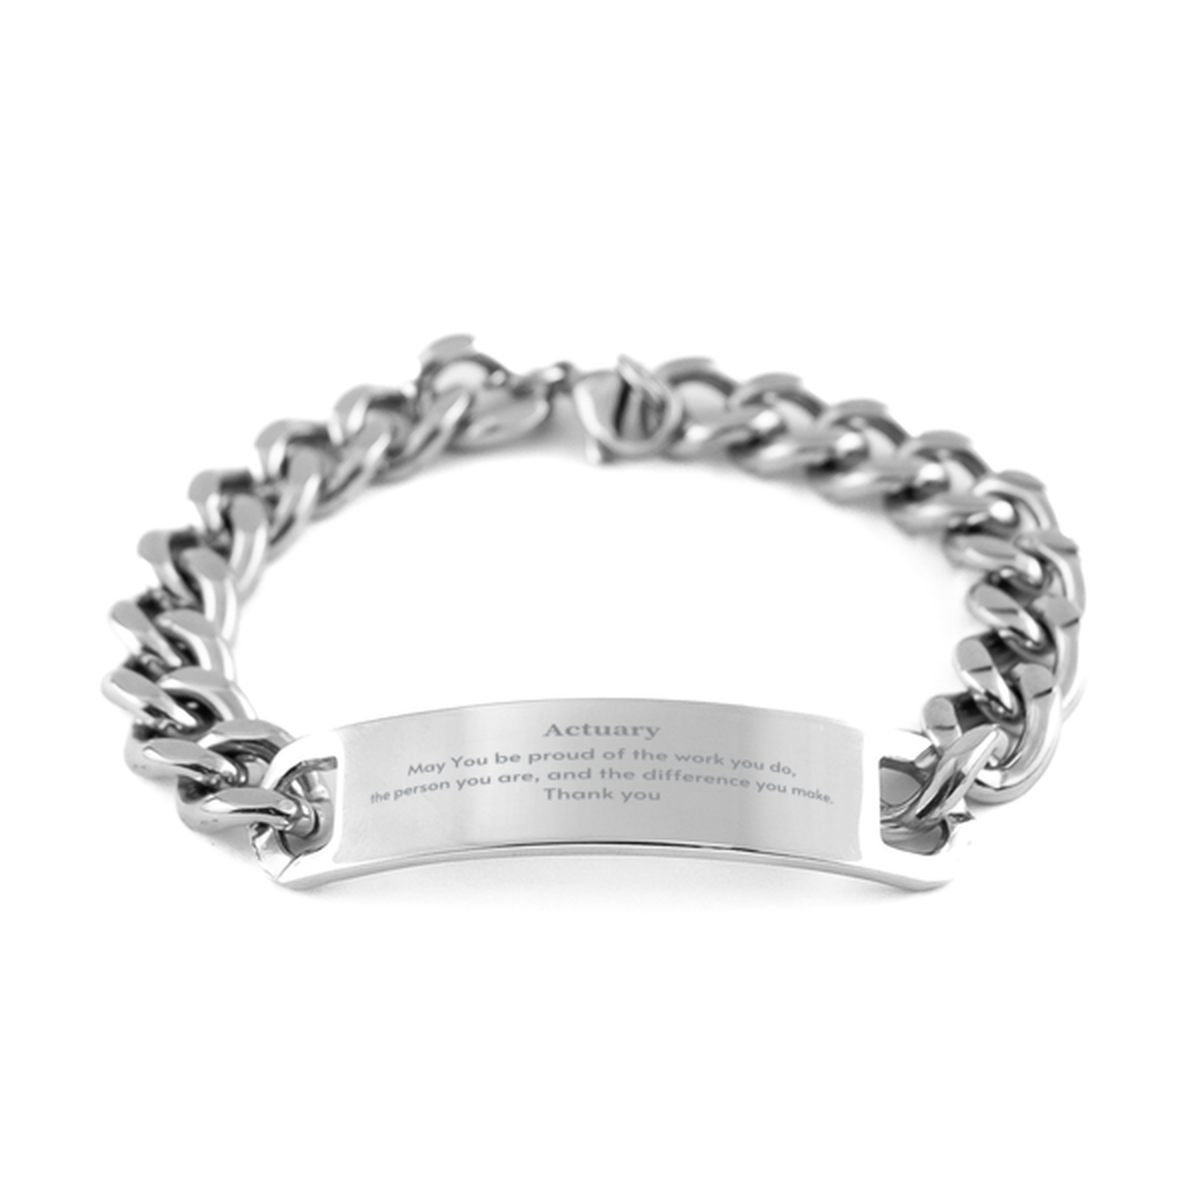 Heartwarming Cuban Chain Stainless Steel Bracelet Retirement Coworkers Gifts for Actuary, Actuary May You be proud of the work you do, the person you are Gifts for Boss Men Women Friends